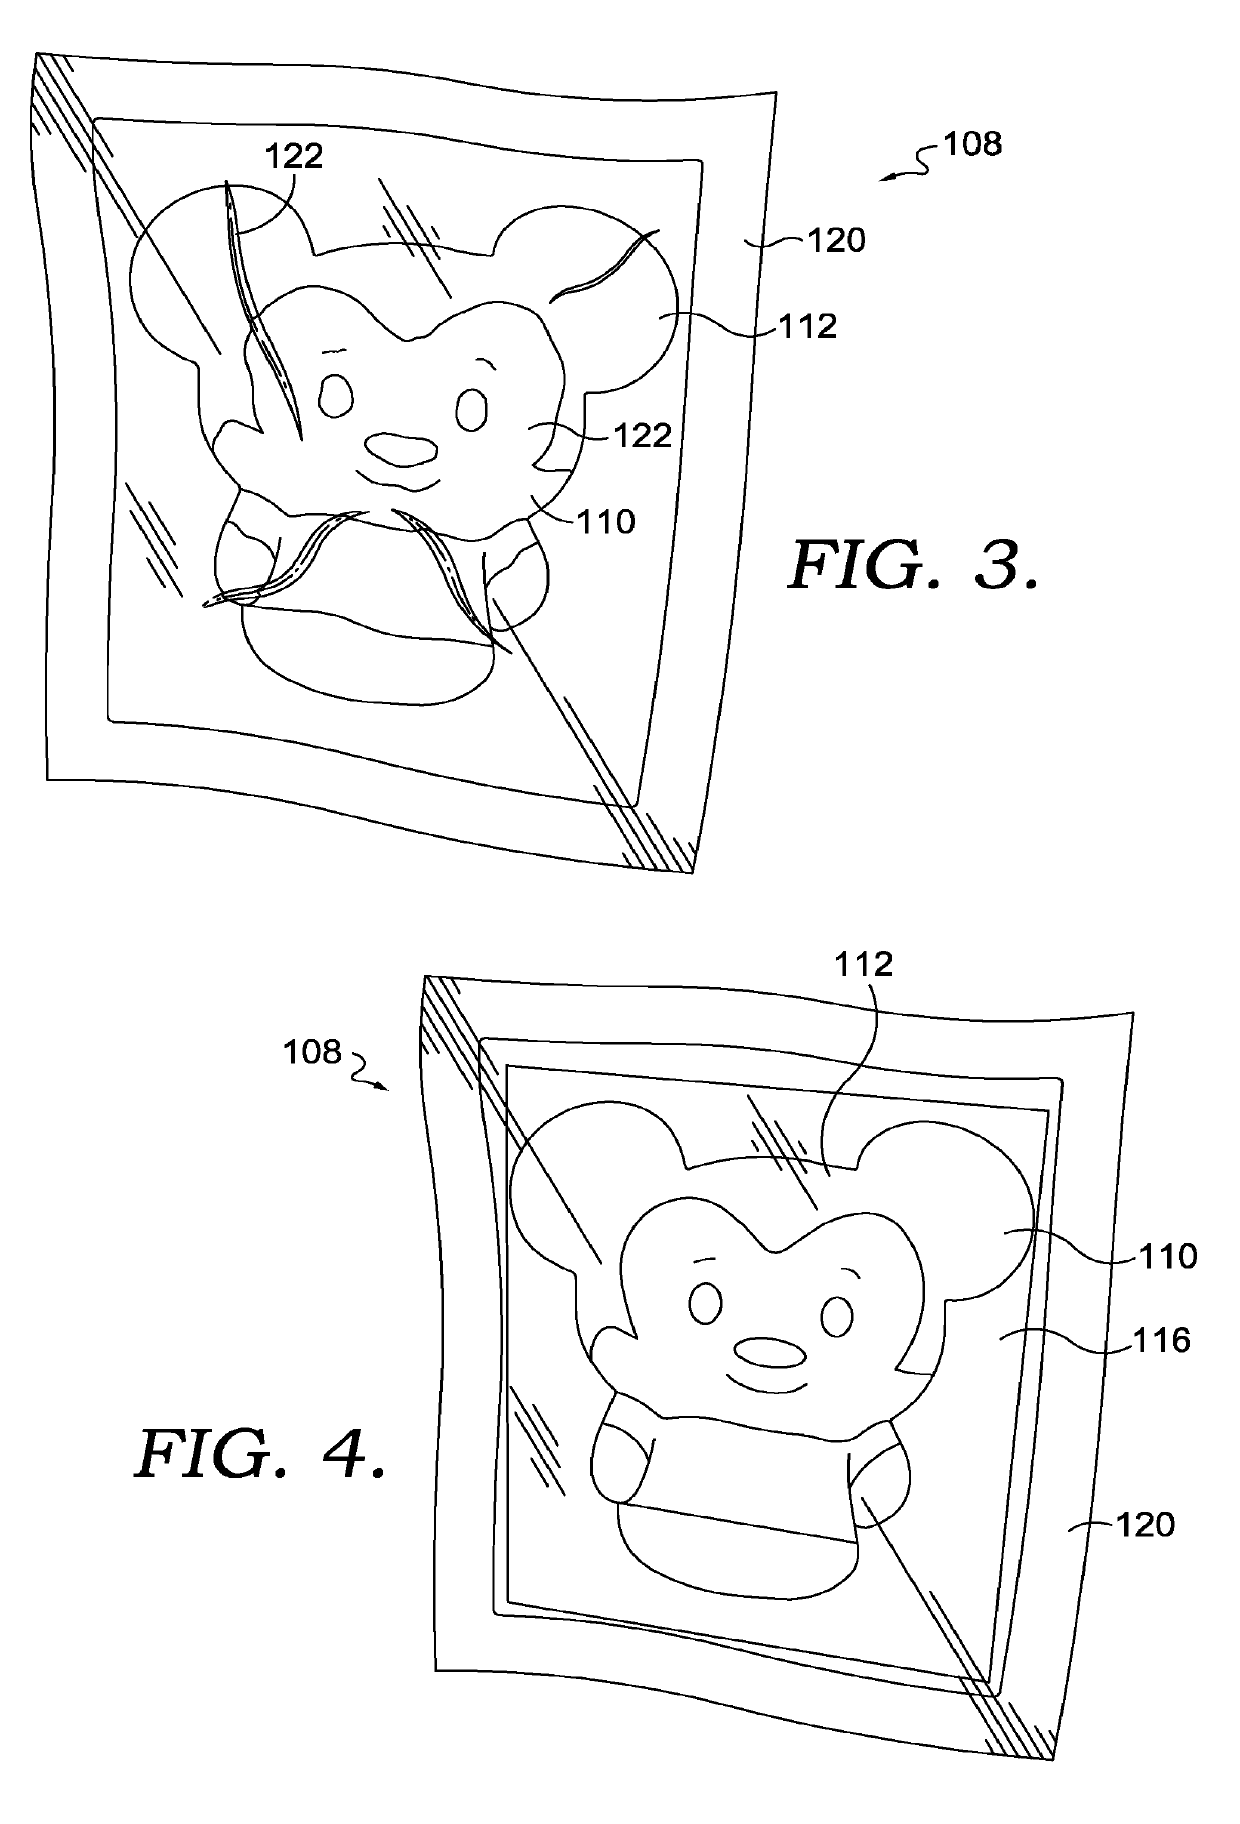 Greeting Card Having Compressed Object Therein and Method of Selectively Controlling Deformation Thereof